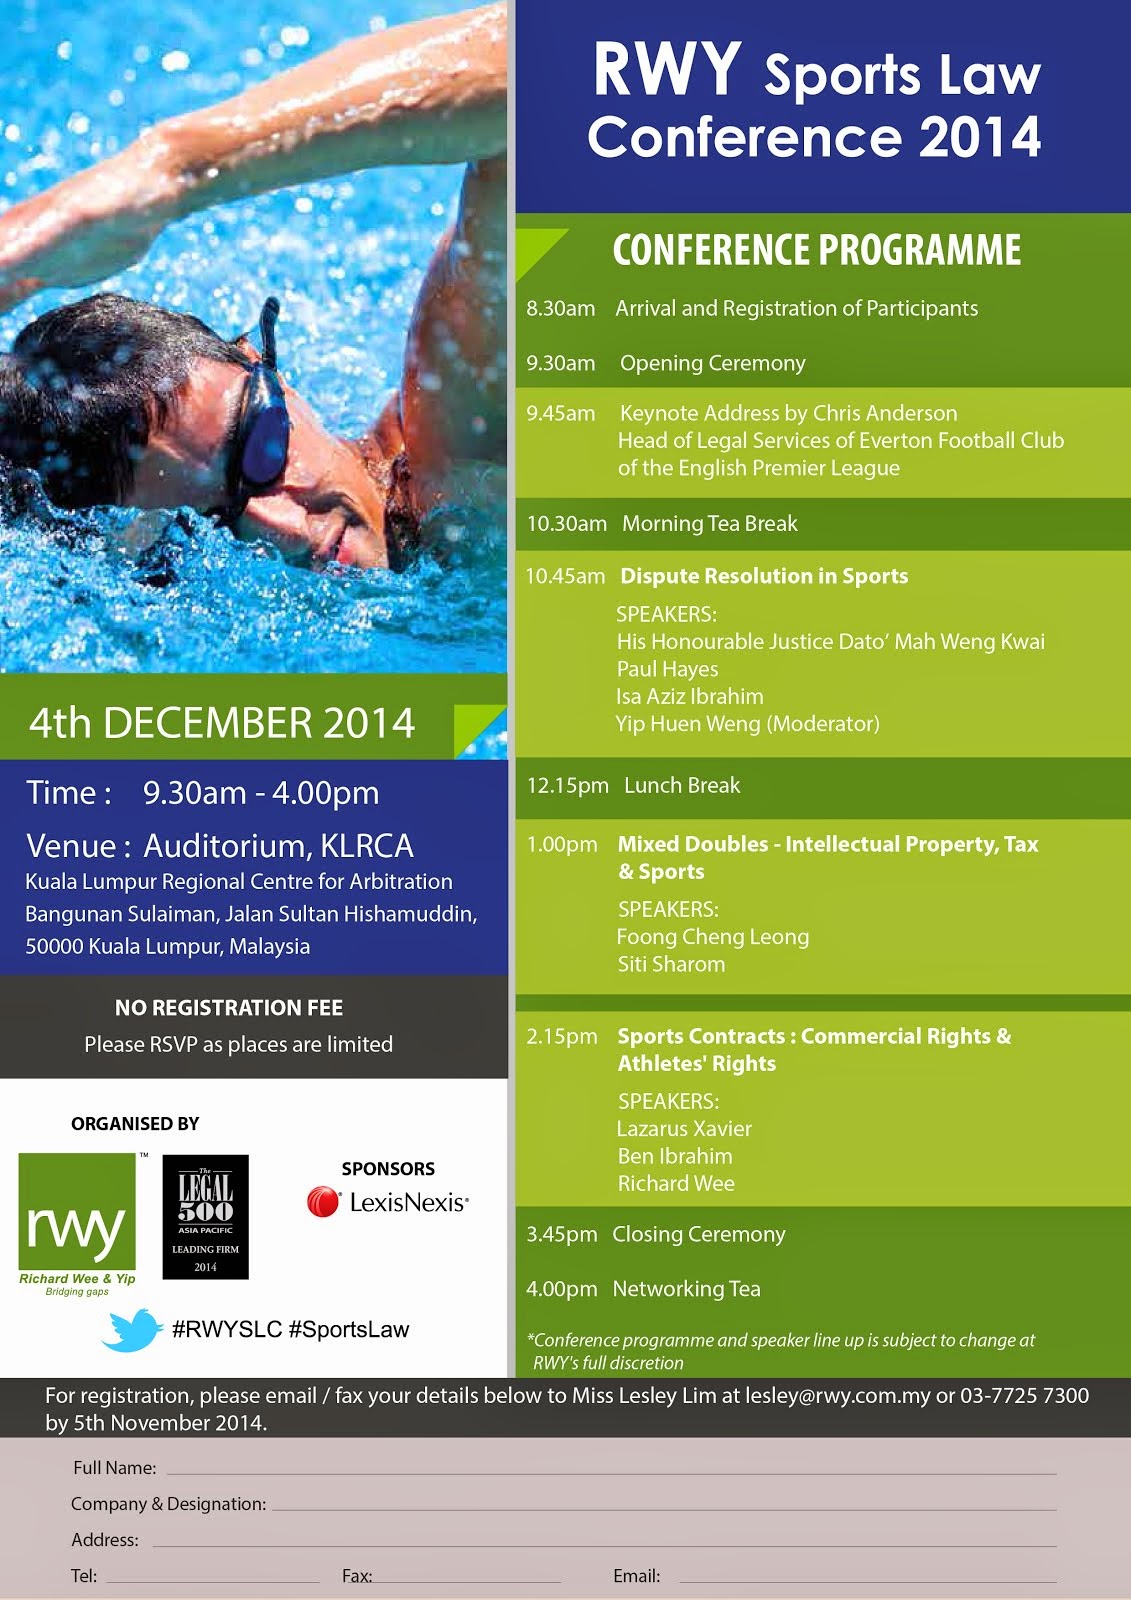 RWY Sports Law Conference 2014